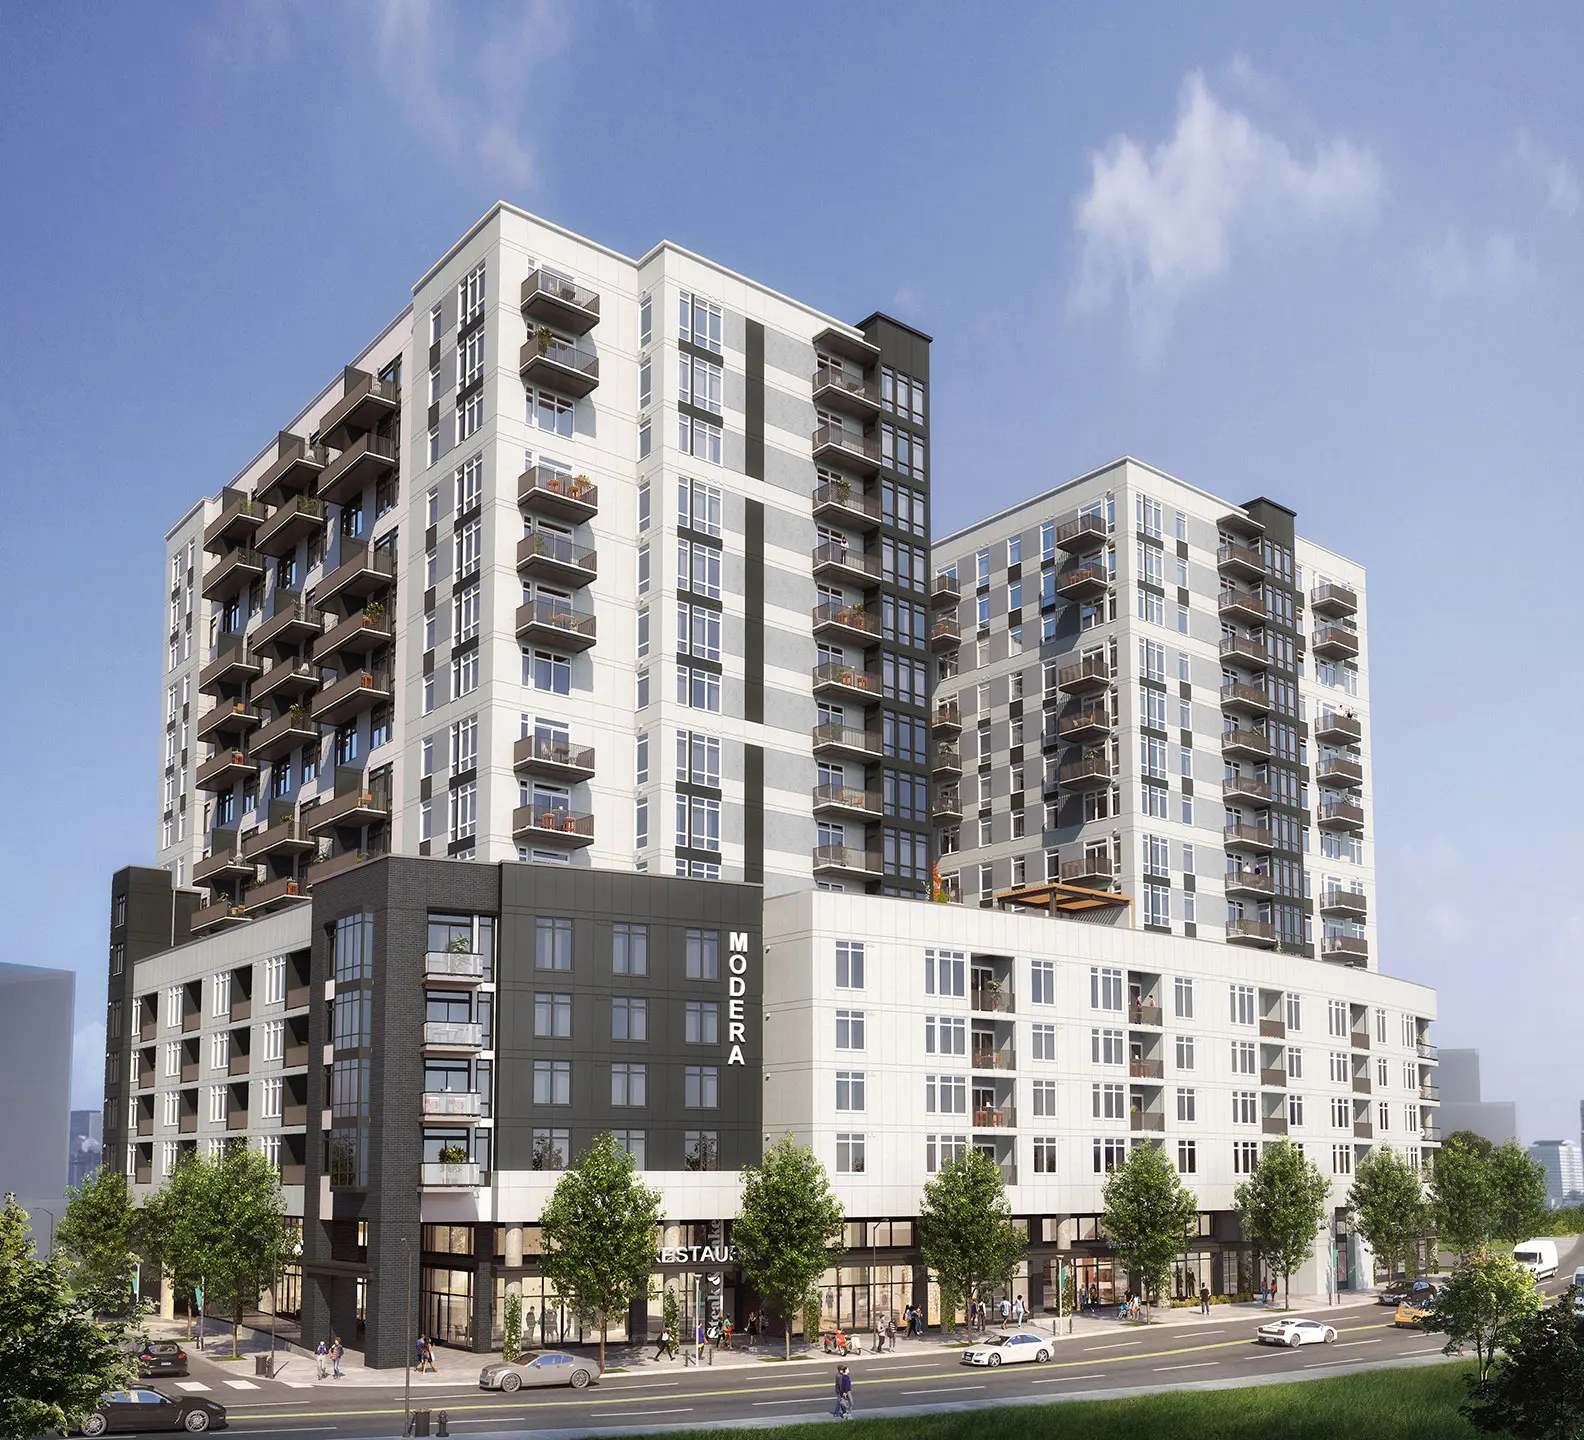 modera-gulch-cooper-carry-multifamily-residential-rendering-exterior